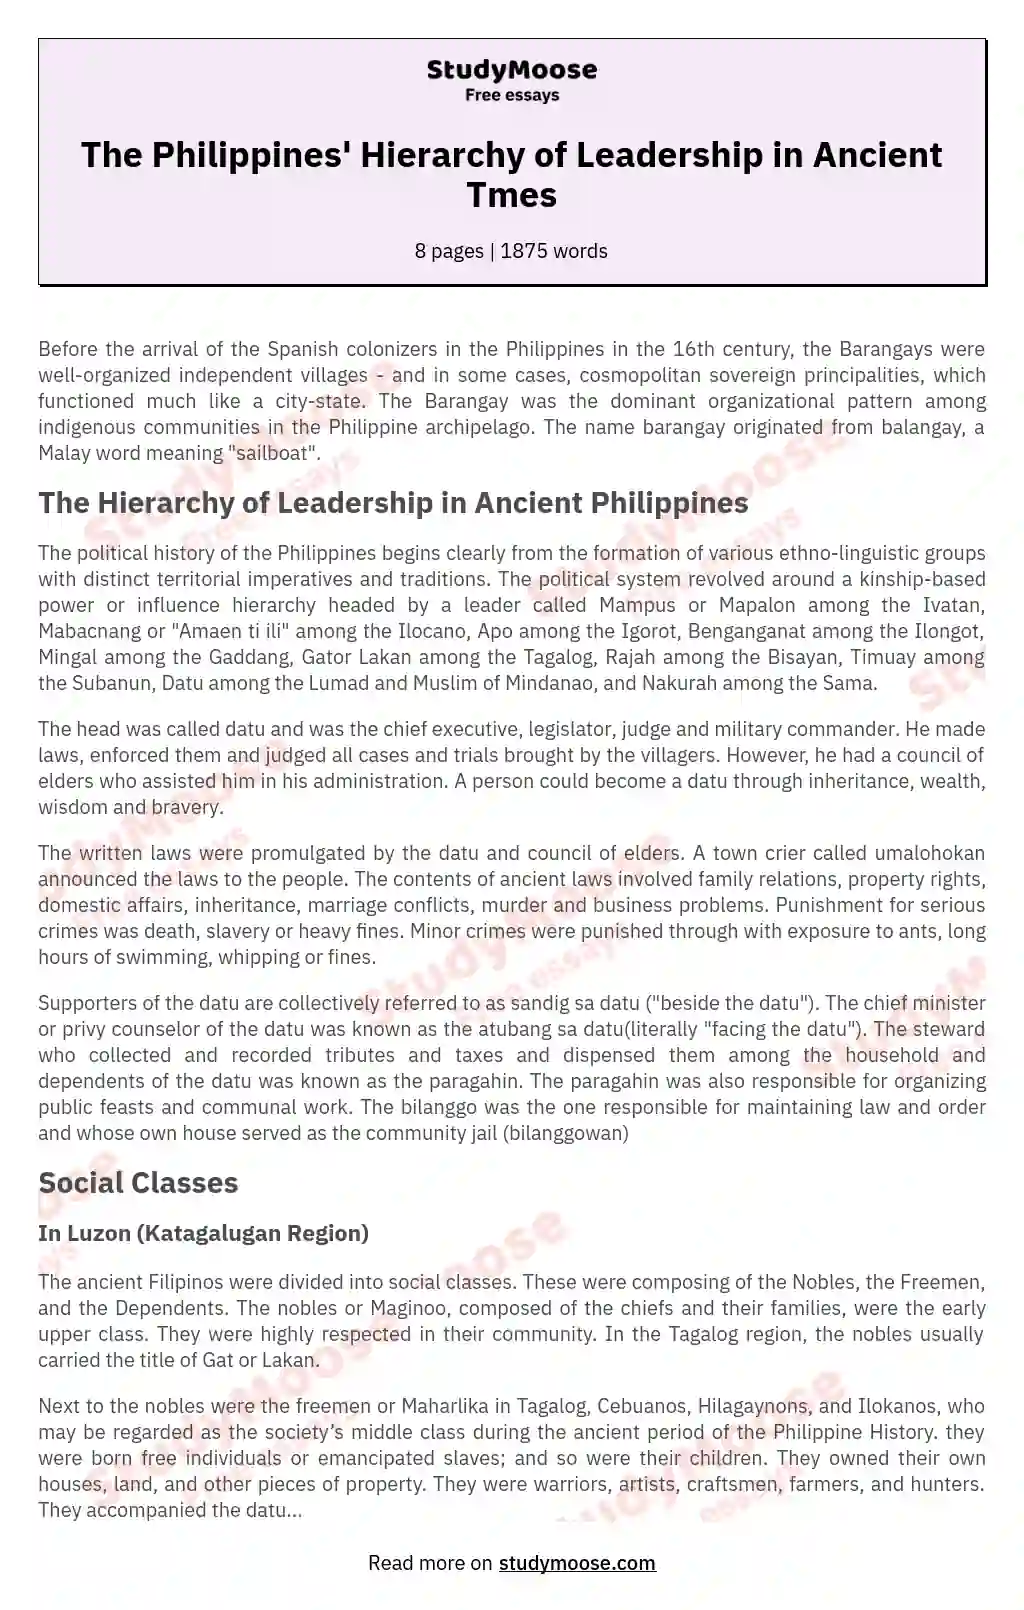 The Philippines' Hierarchy of Leadership in Ancient Tmes essay